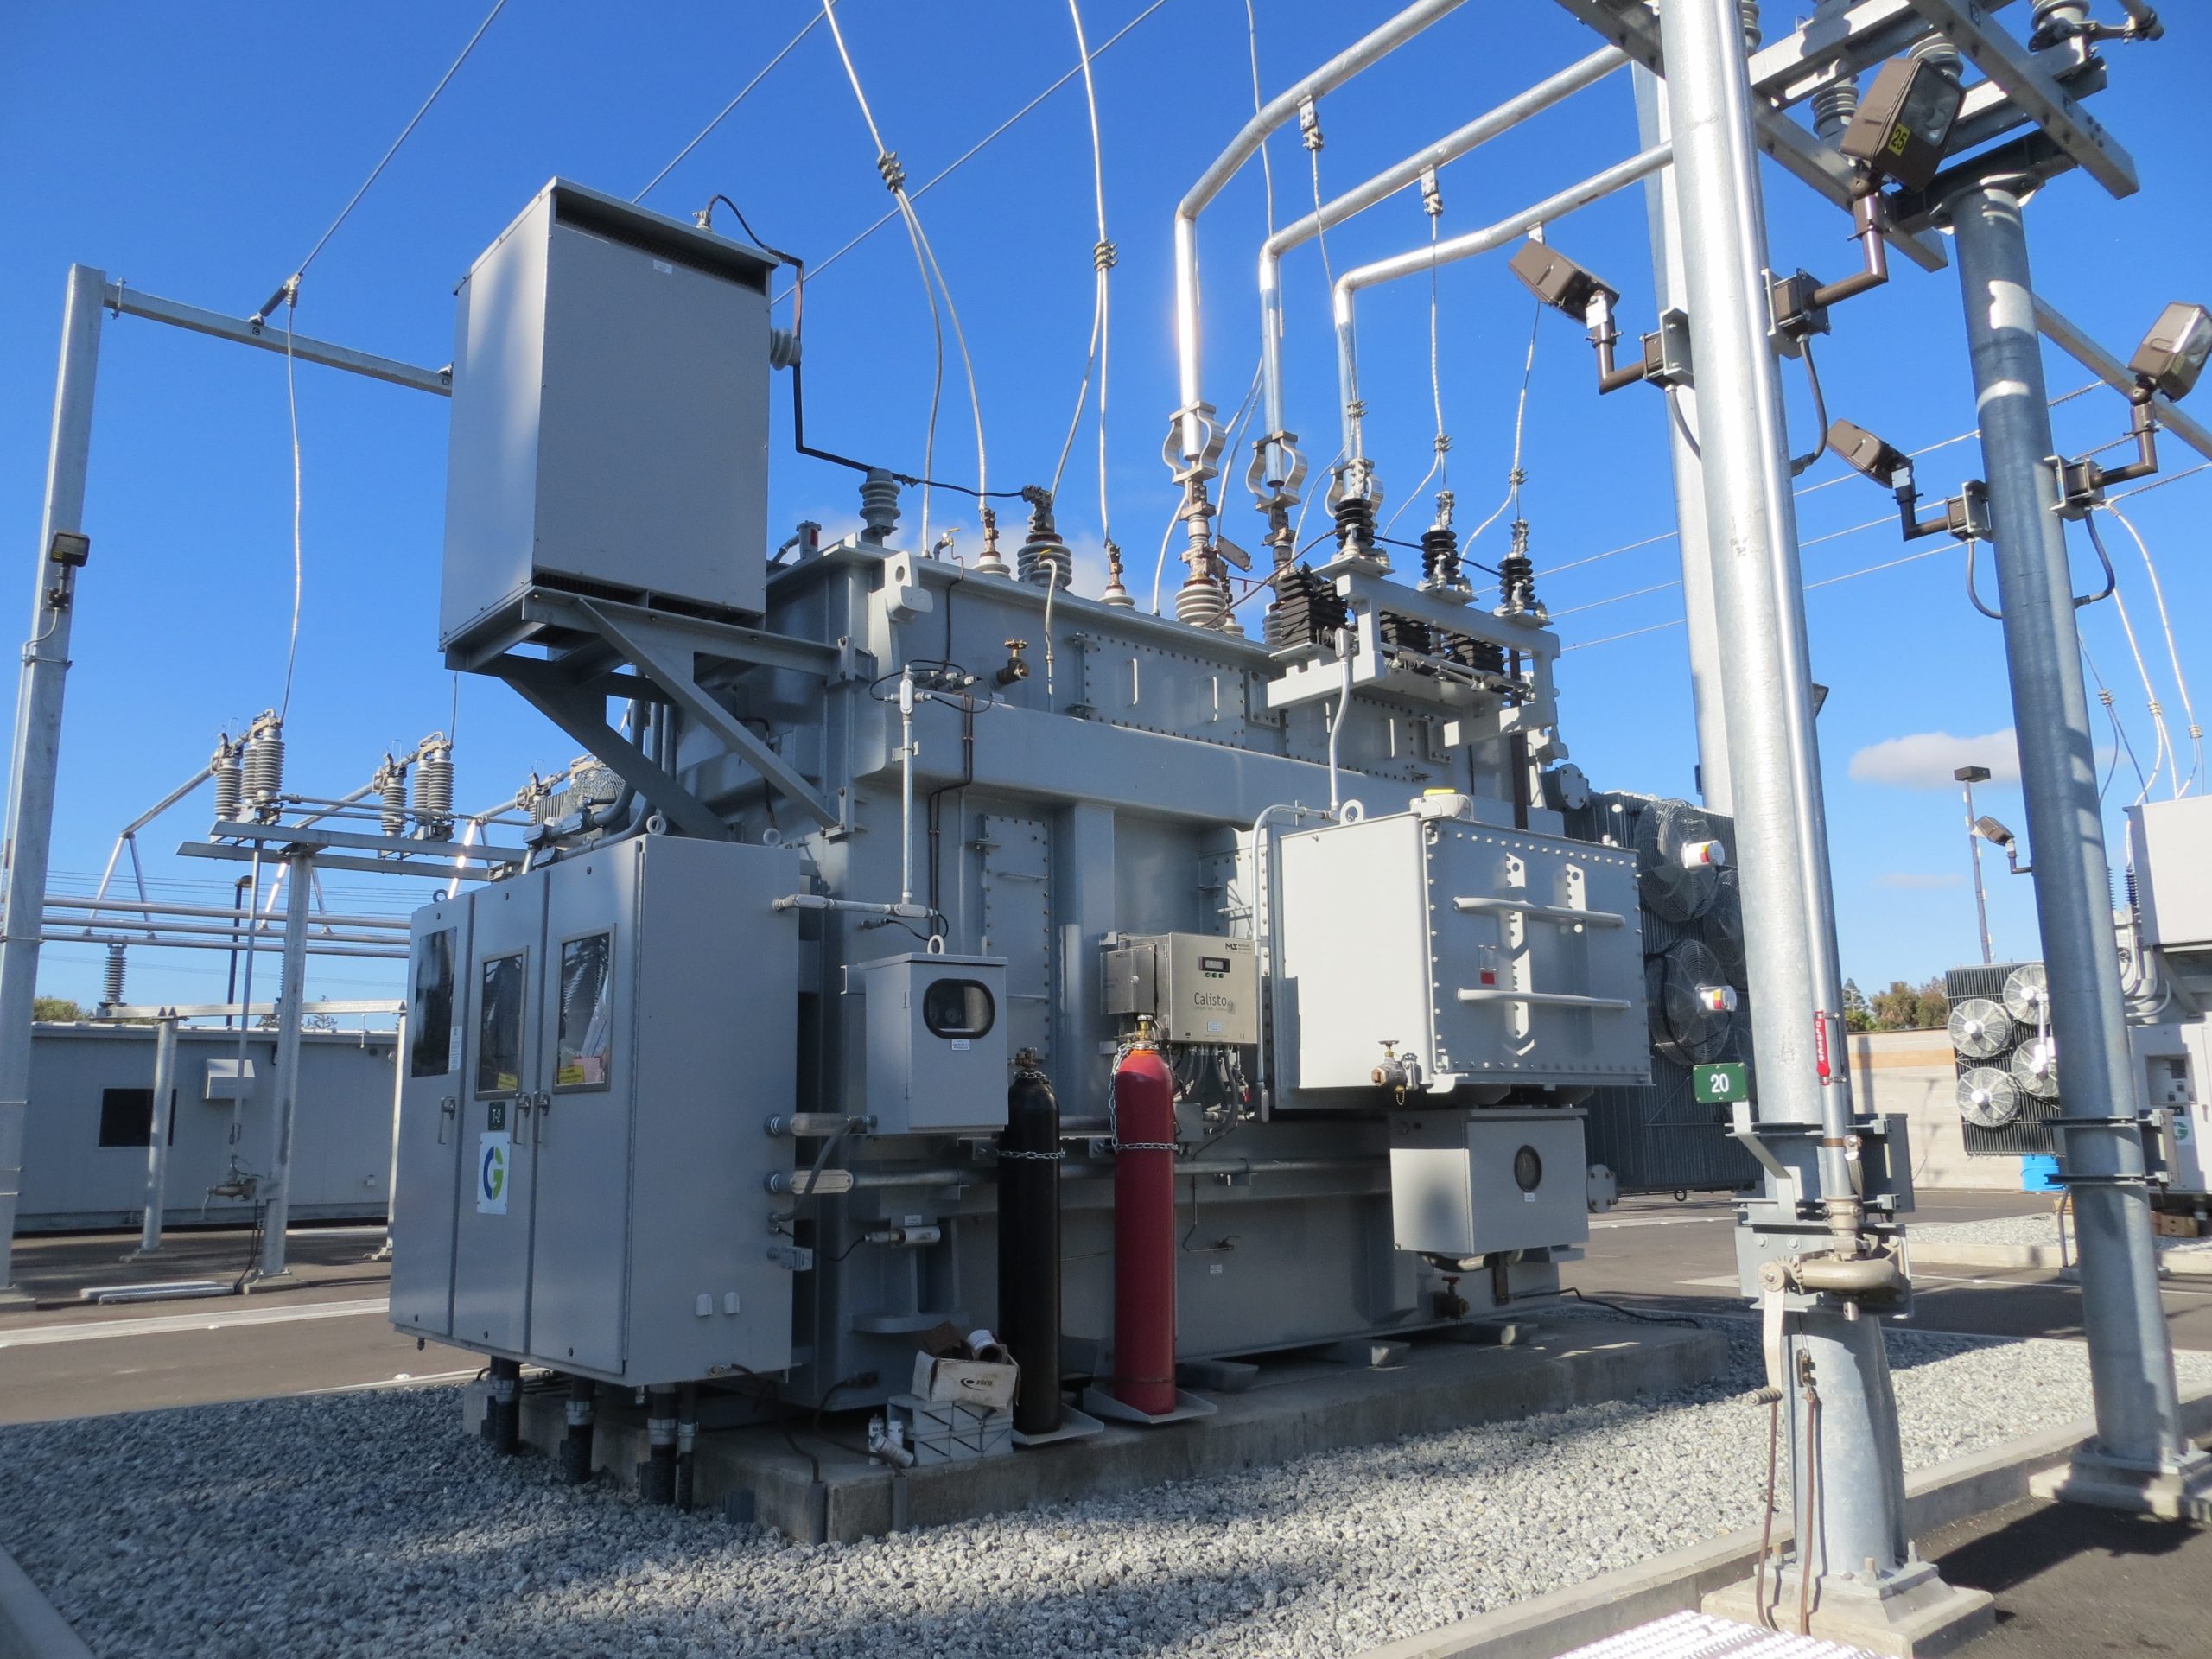 Grey Electric Power Generator Connected to Metal Poles and Wires.